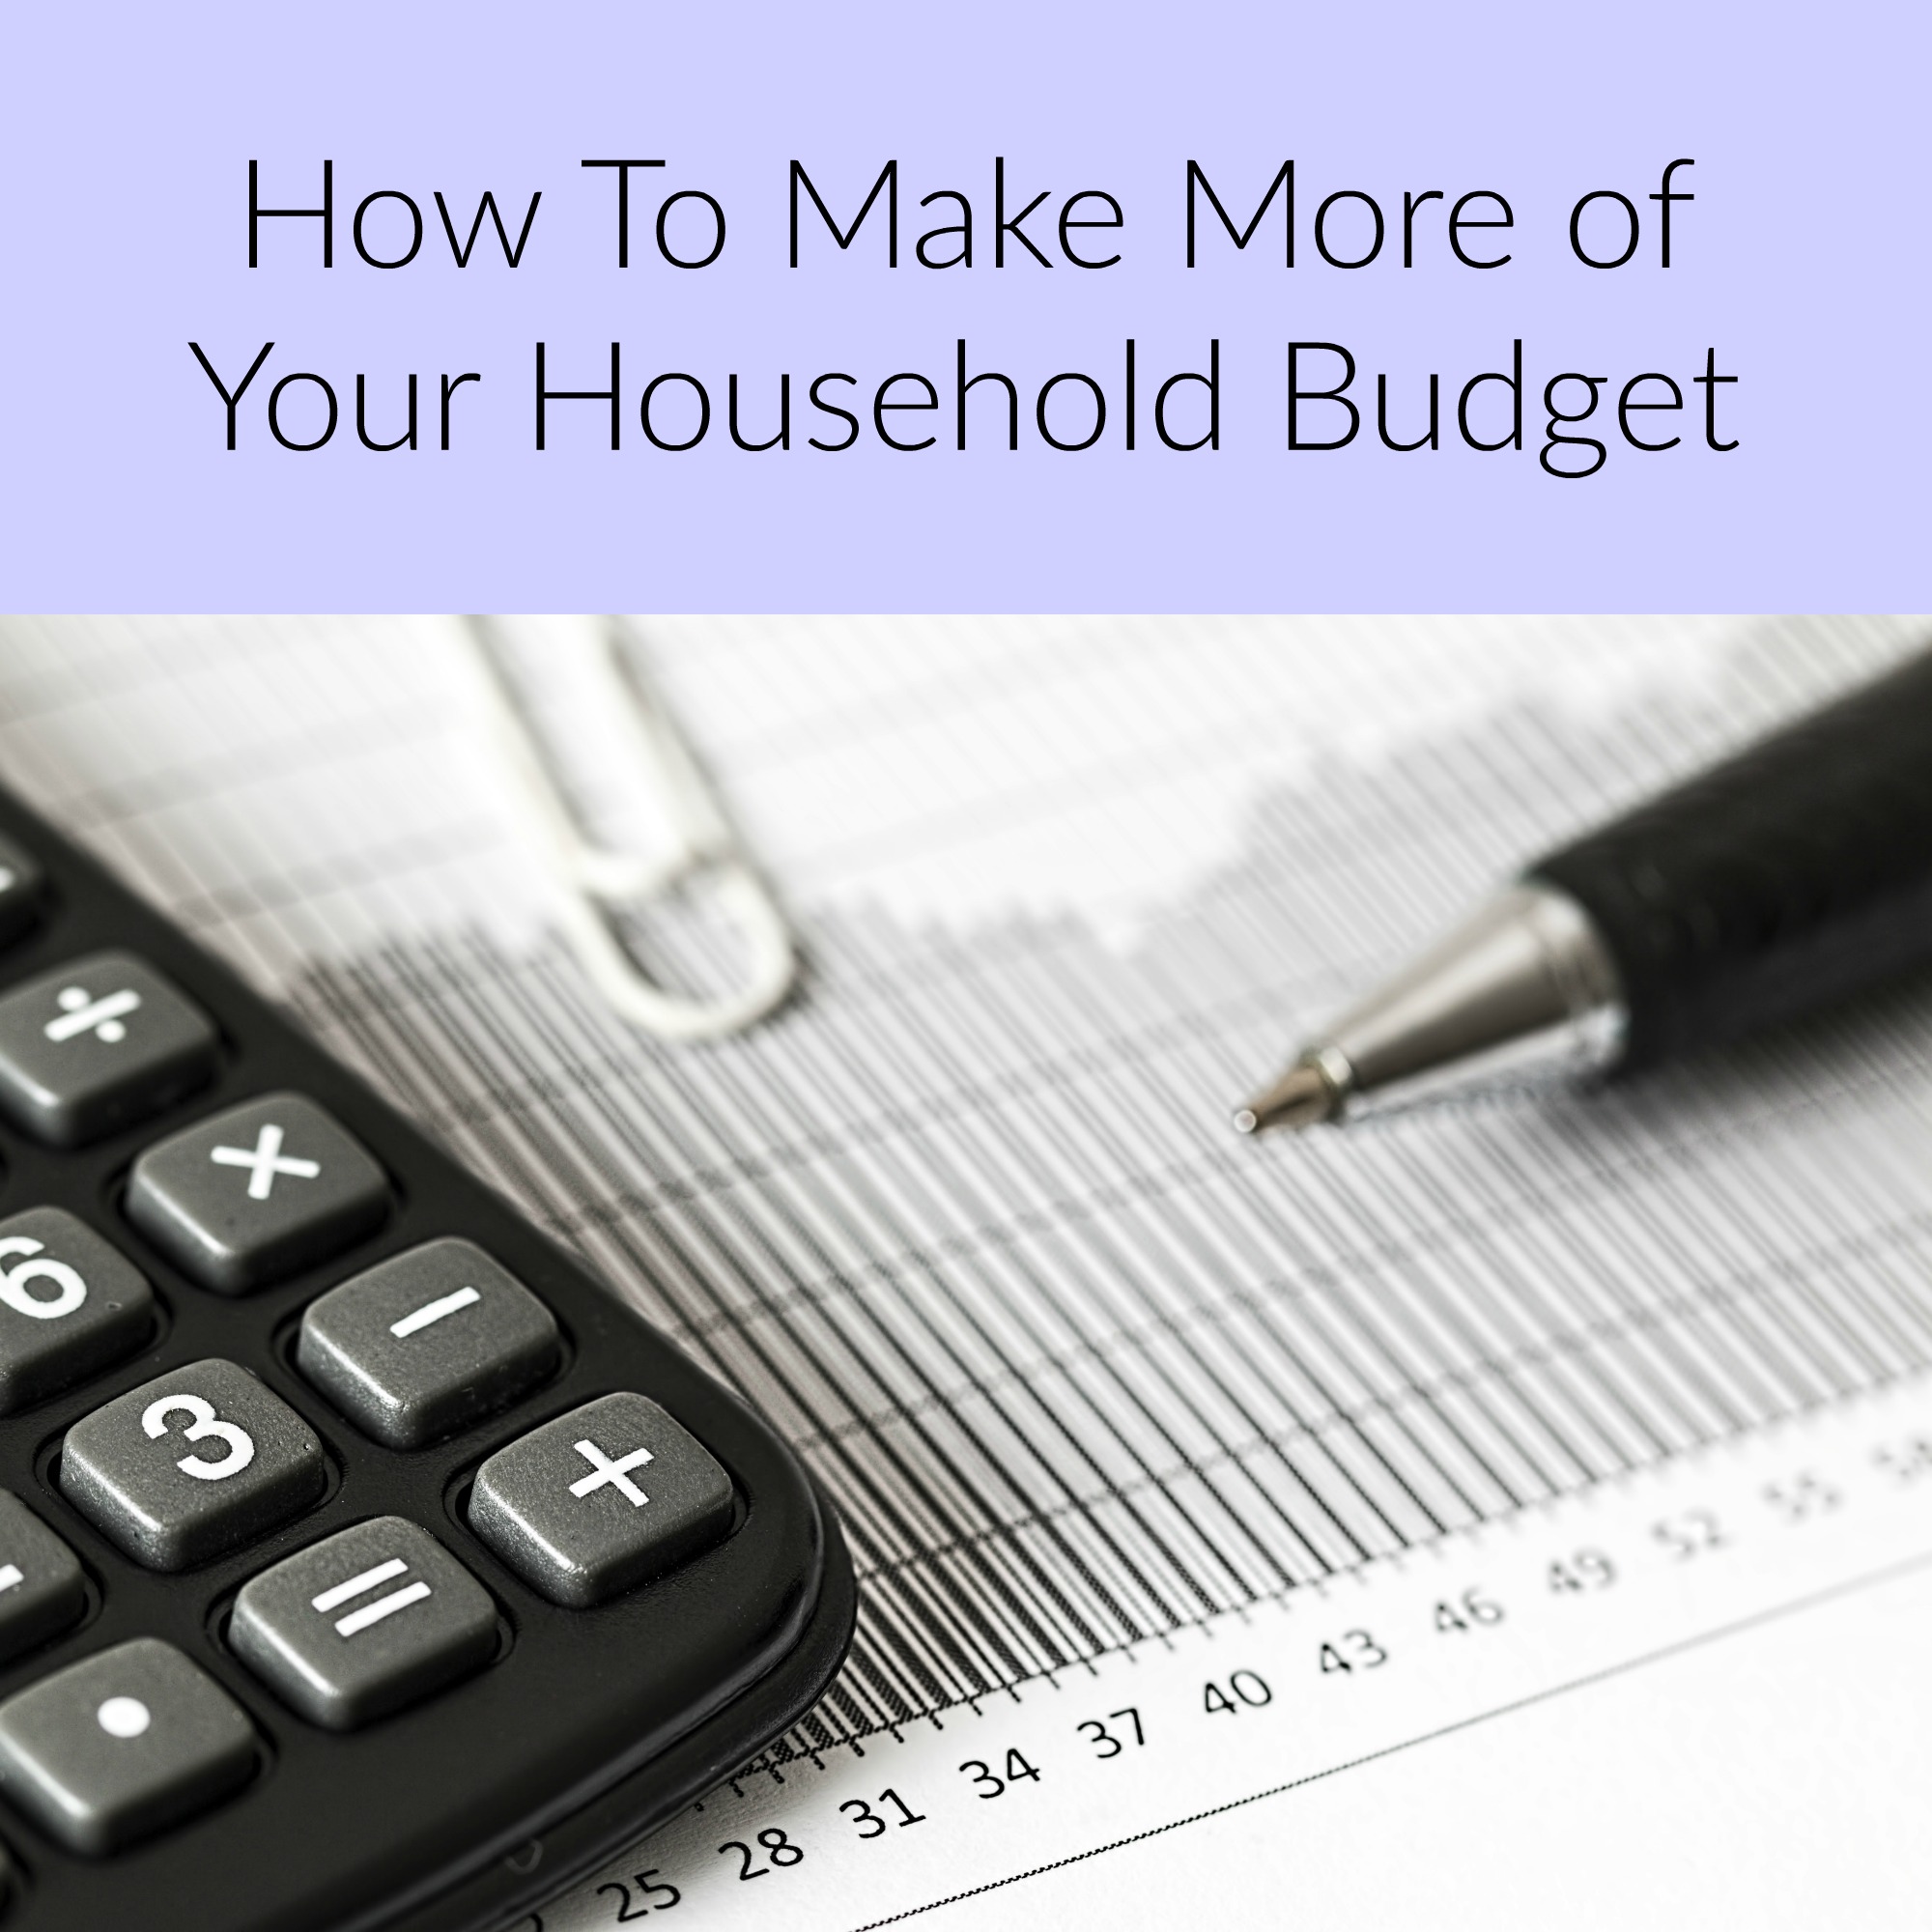 How To Make More of Your Household Budget